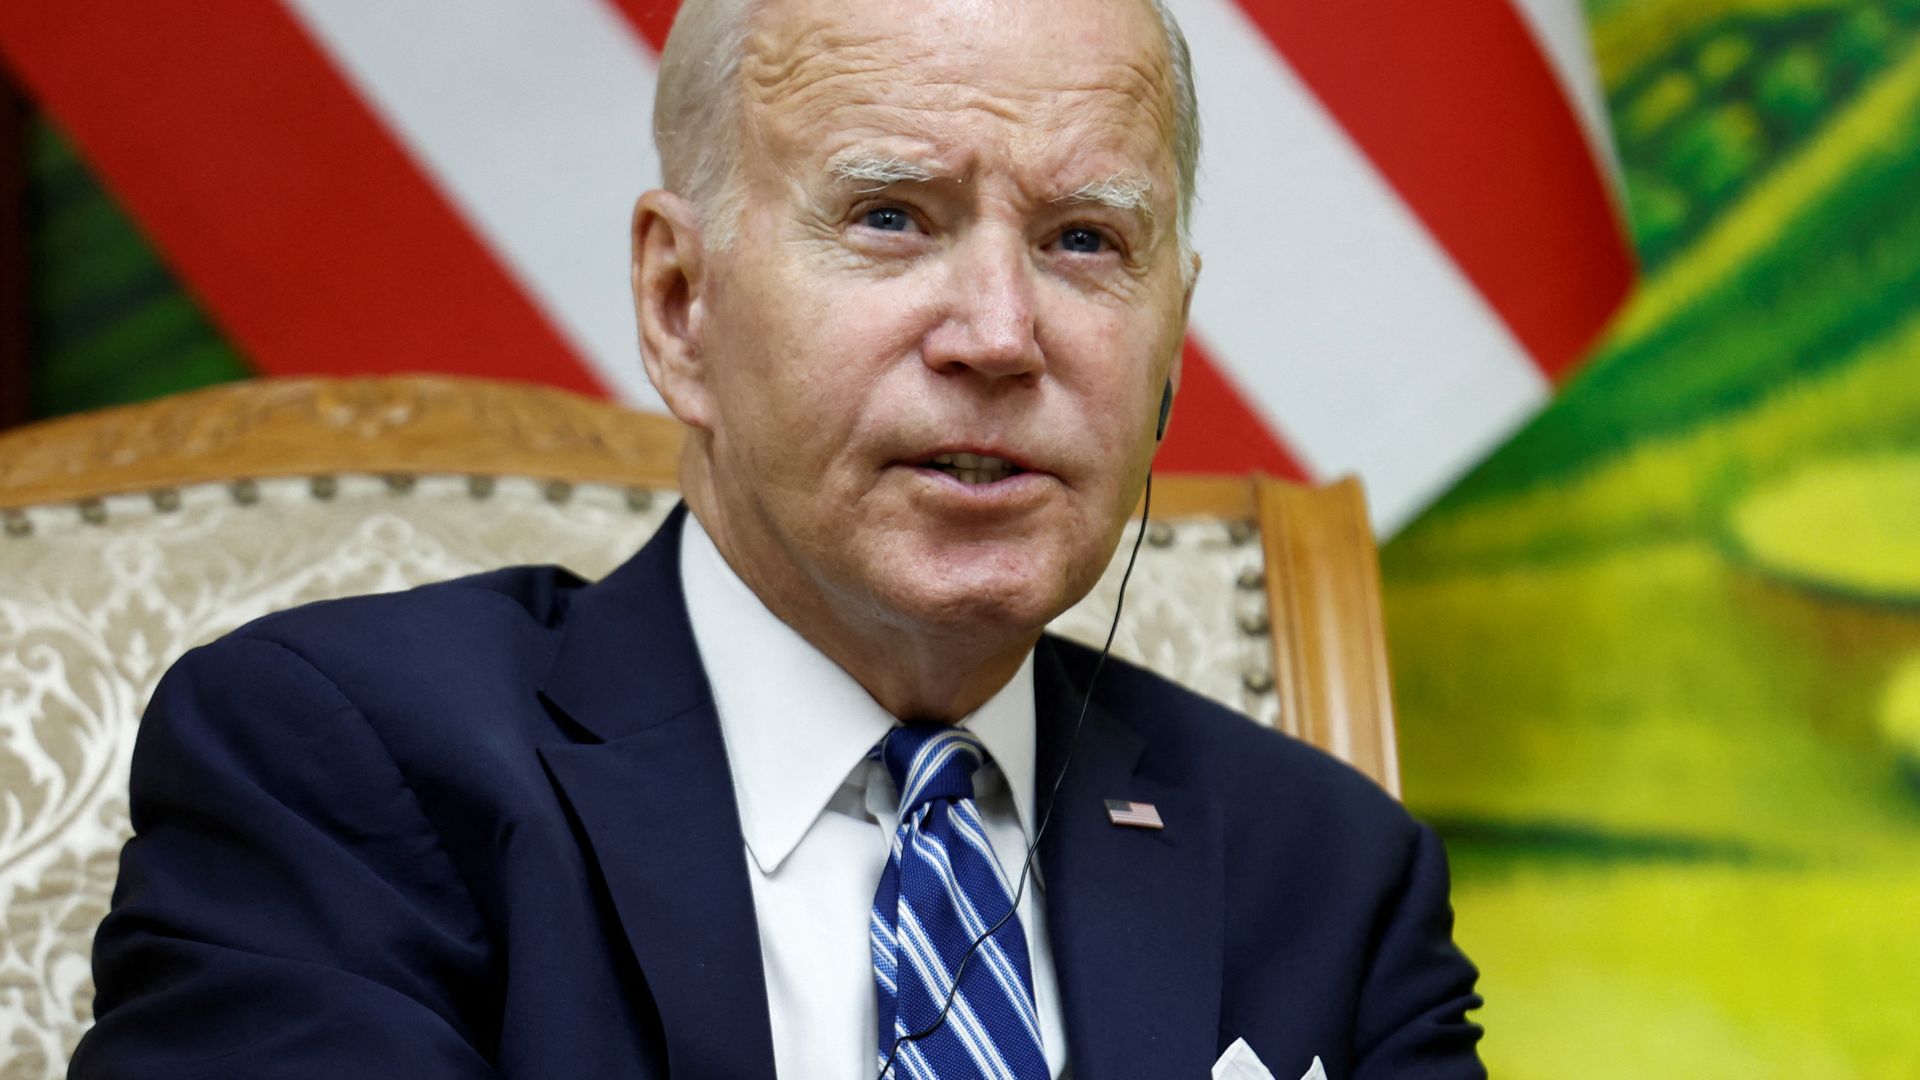 A Reuters poll shows President Biden's approval has bumped two percent in the last month, though it still sits below 50%.